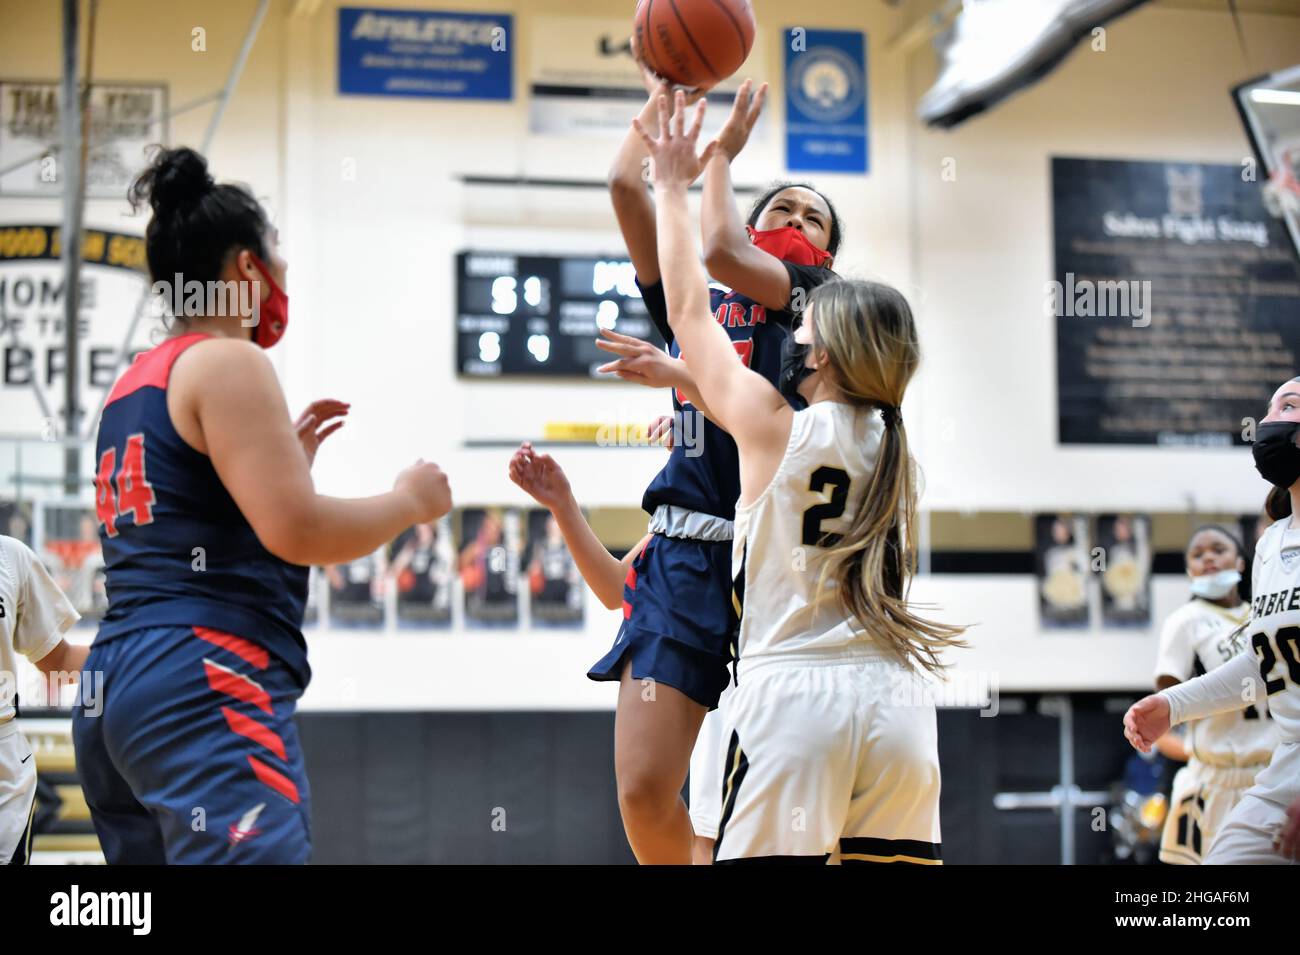 USA. Player triggering a short shot from within the paint over the defense of an opponent. Stock Photo